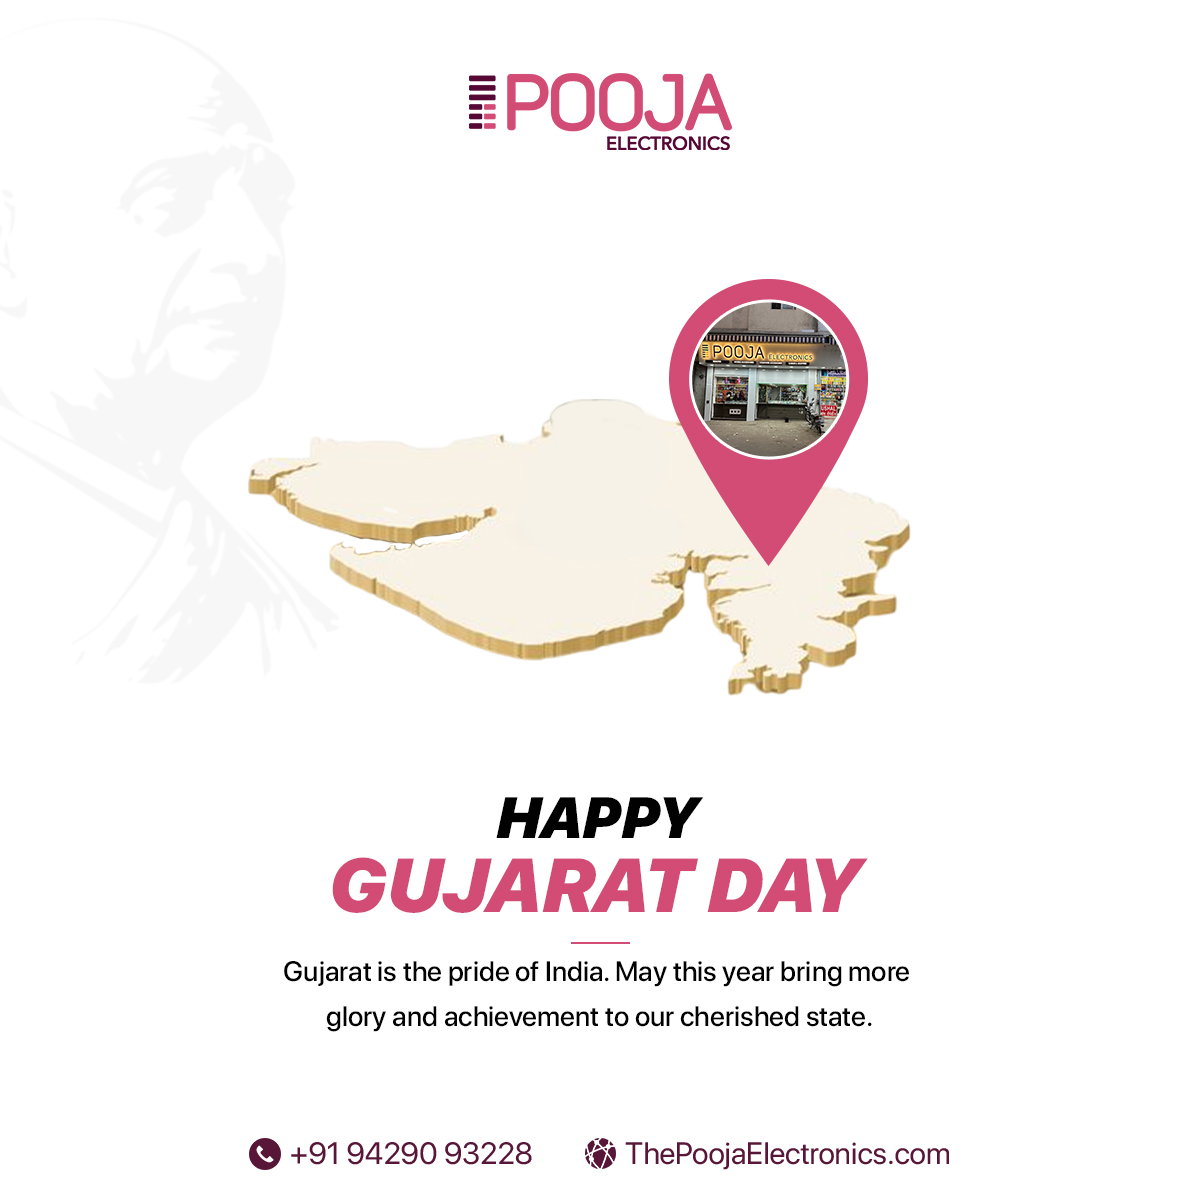 Gujarat is the pride of India. May this year bring more glory and achievement to our cherished state.
.
#poojaelectronics #happygujaratday #gujarat #RemoteRevival #RemoteReplacement #acremote #caraudioremote #DigitalEntertainment #connectivity #DigitalStreaming #hometheatersystem